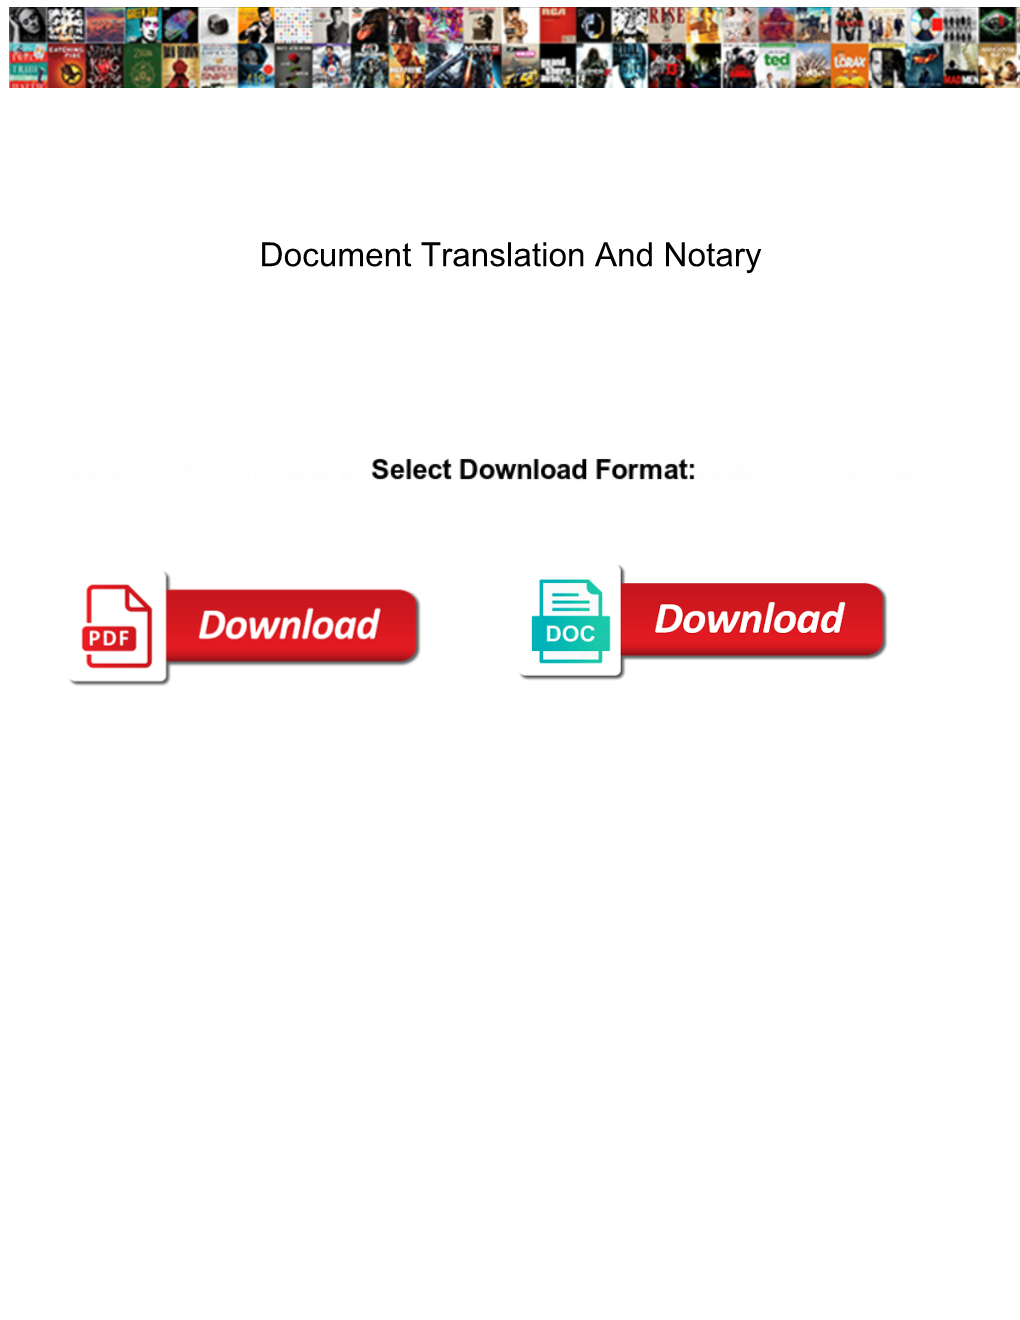 Document Translation and Notary